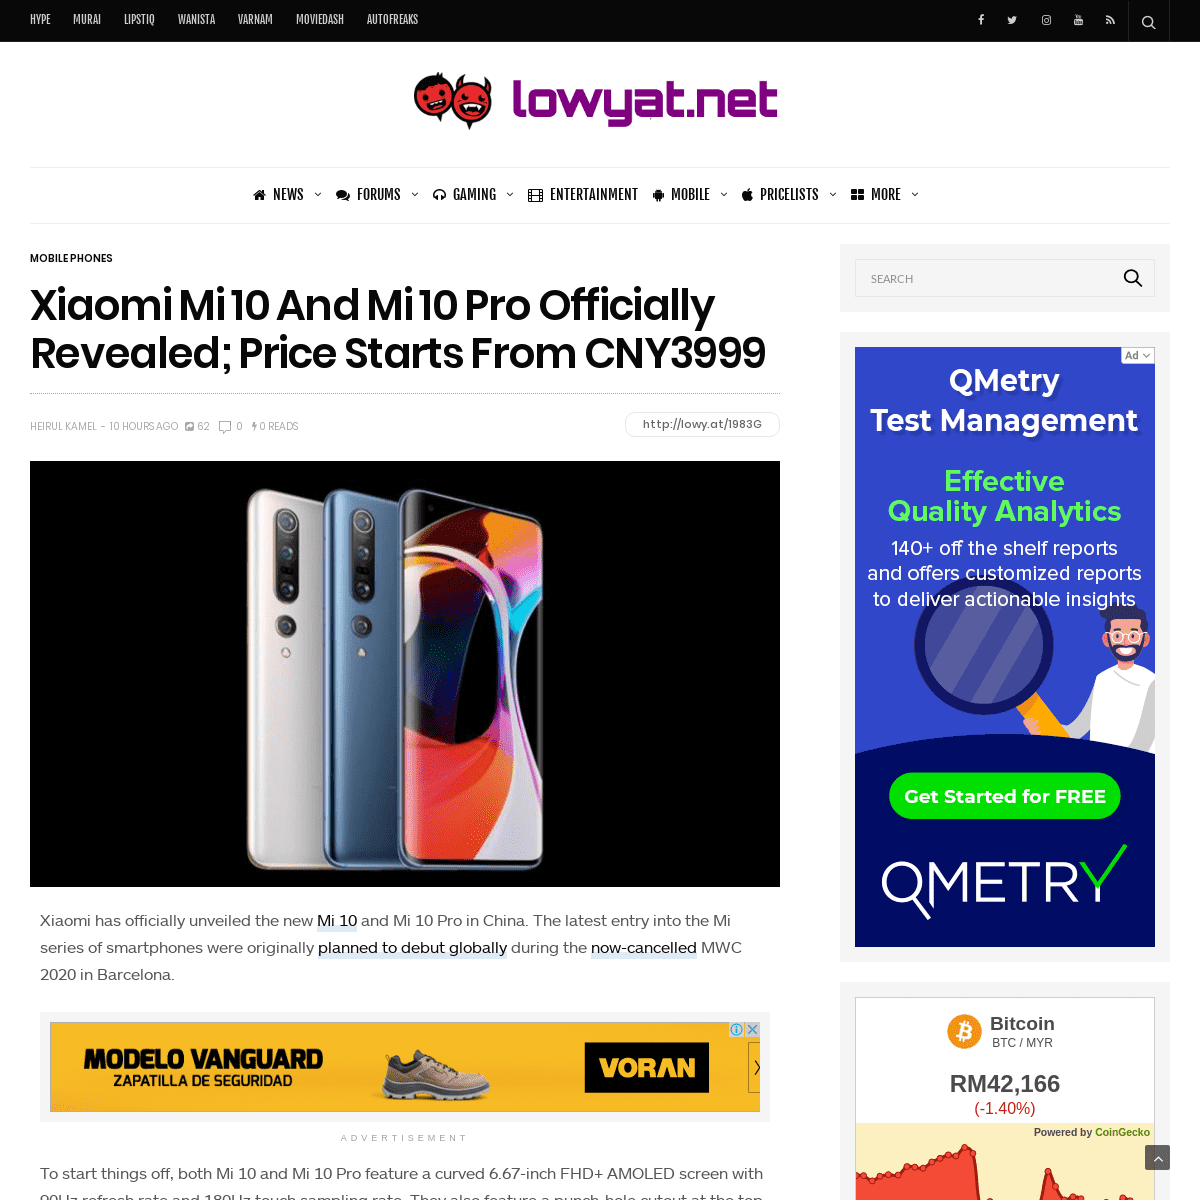 A complete backup of www.lowyat.net/2020/205658/xiaomi-mi-10-and-mi-10-pro-officially-revealed-ahead-of-schedule-price-starts-fr